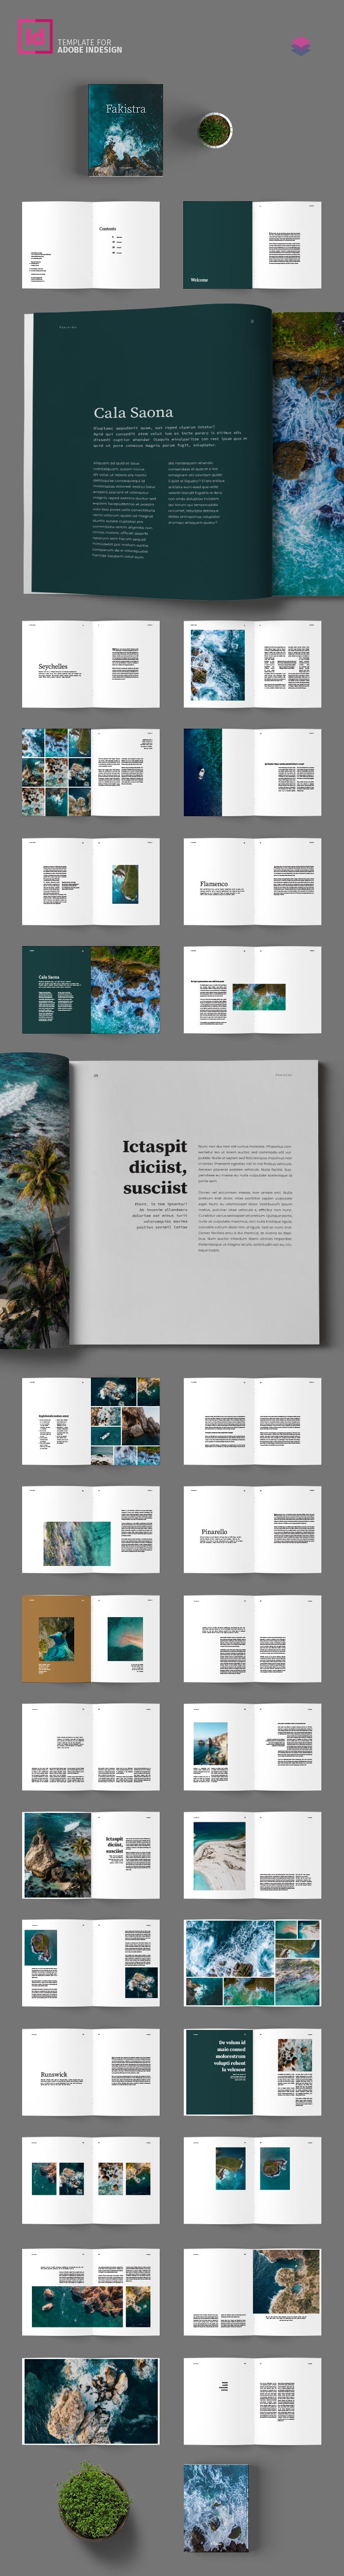 Coffee Table Book Template in Adobe InDesign